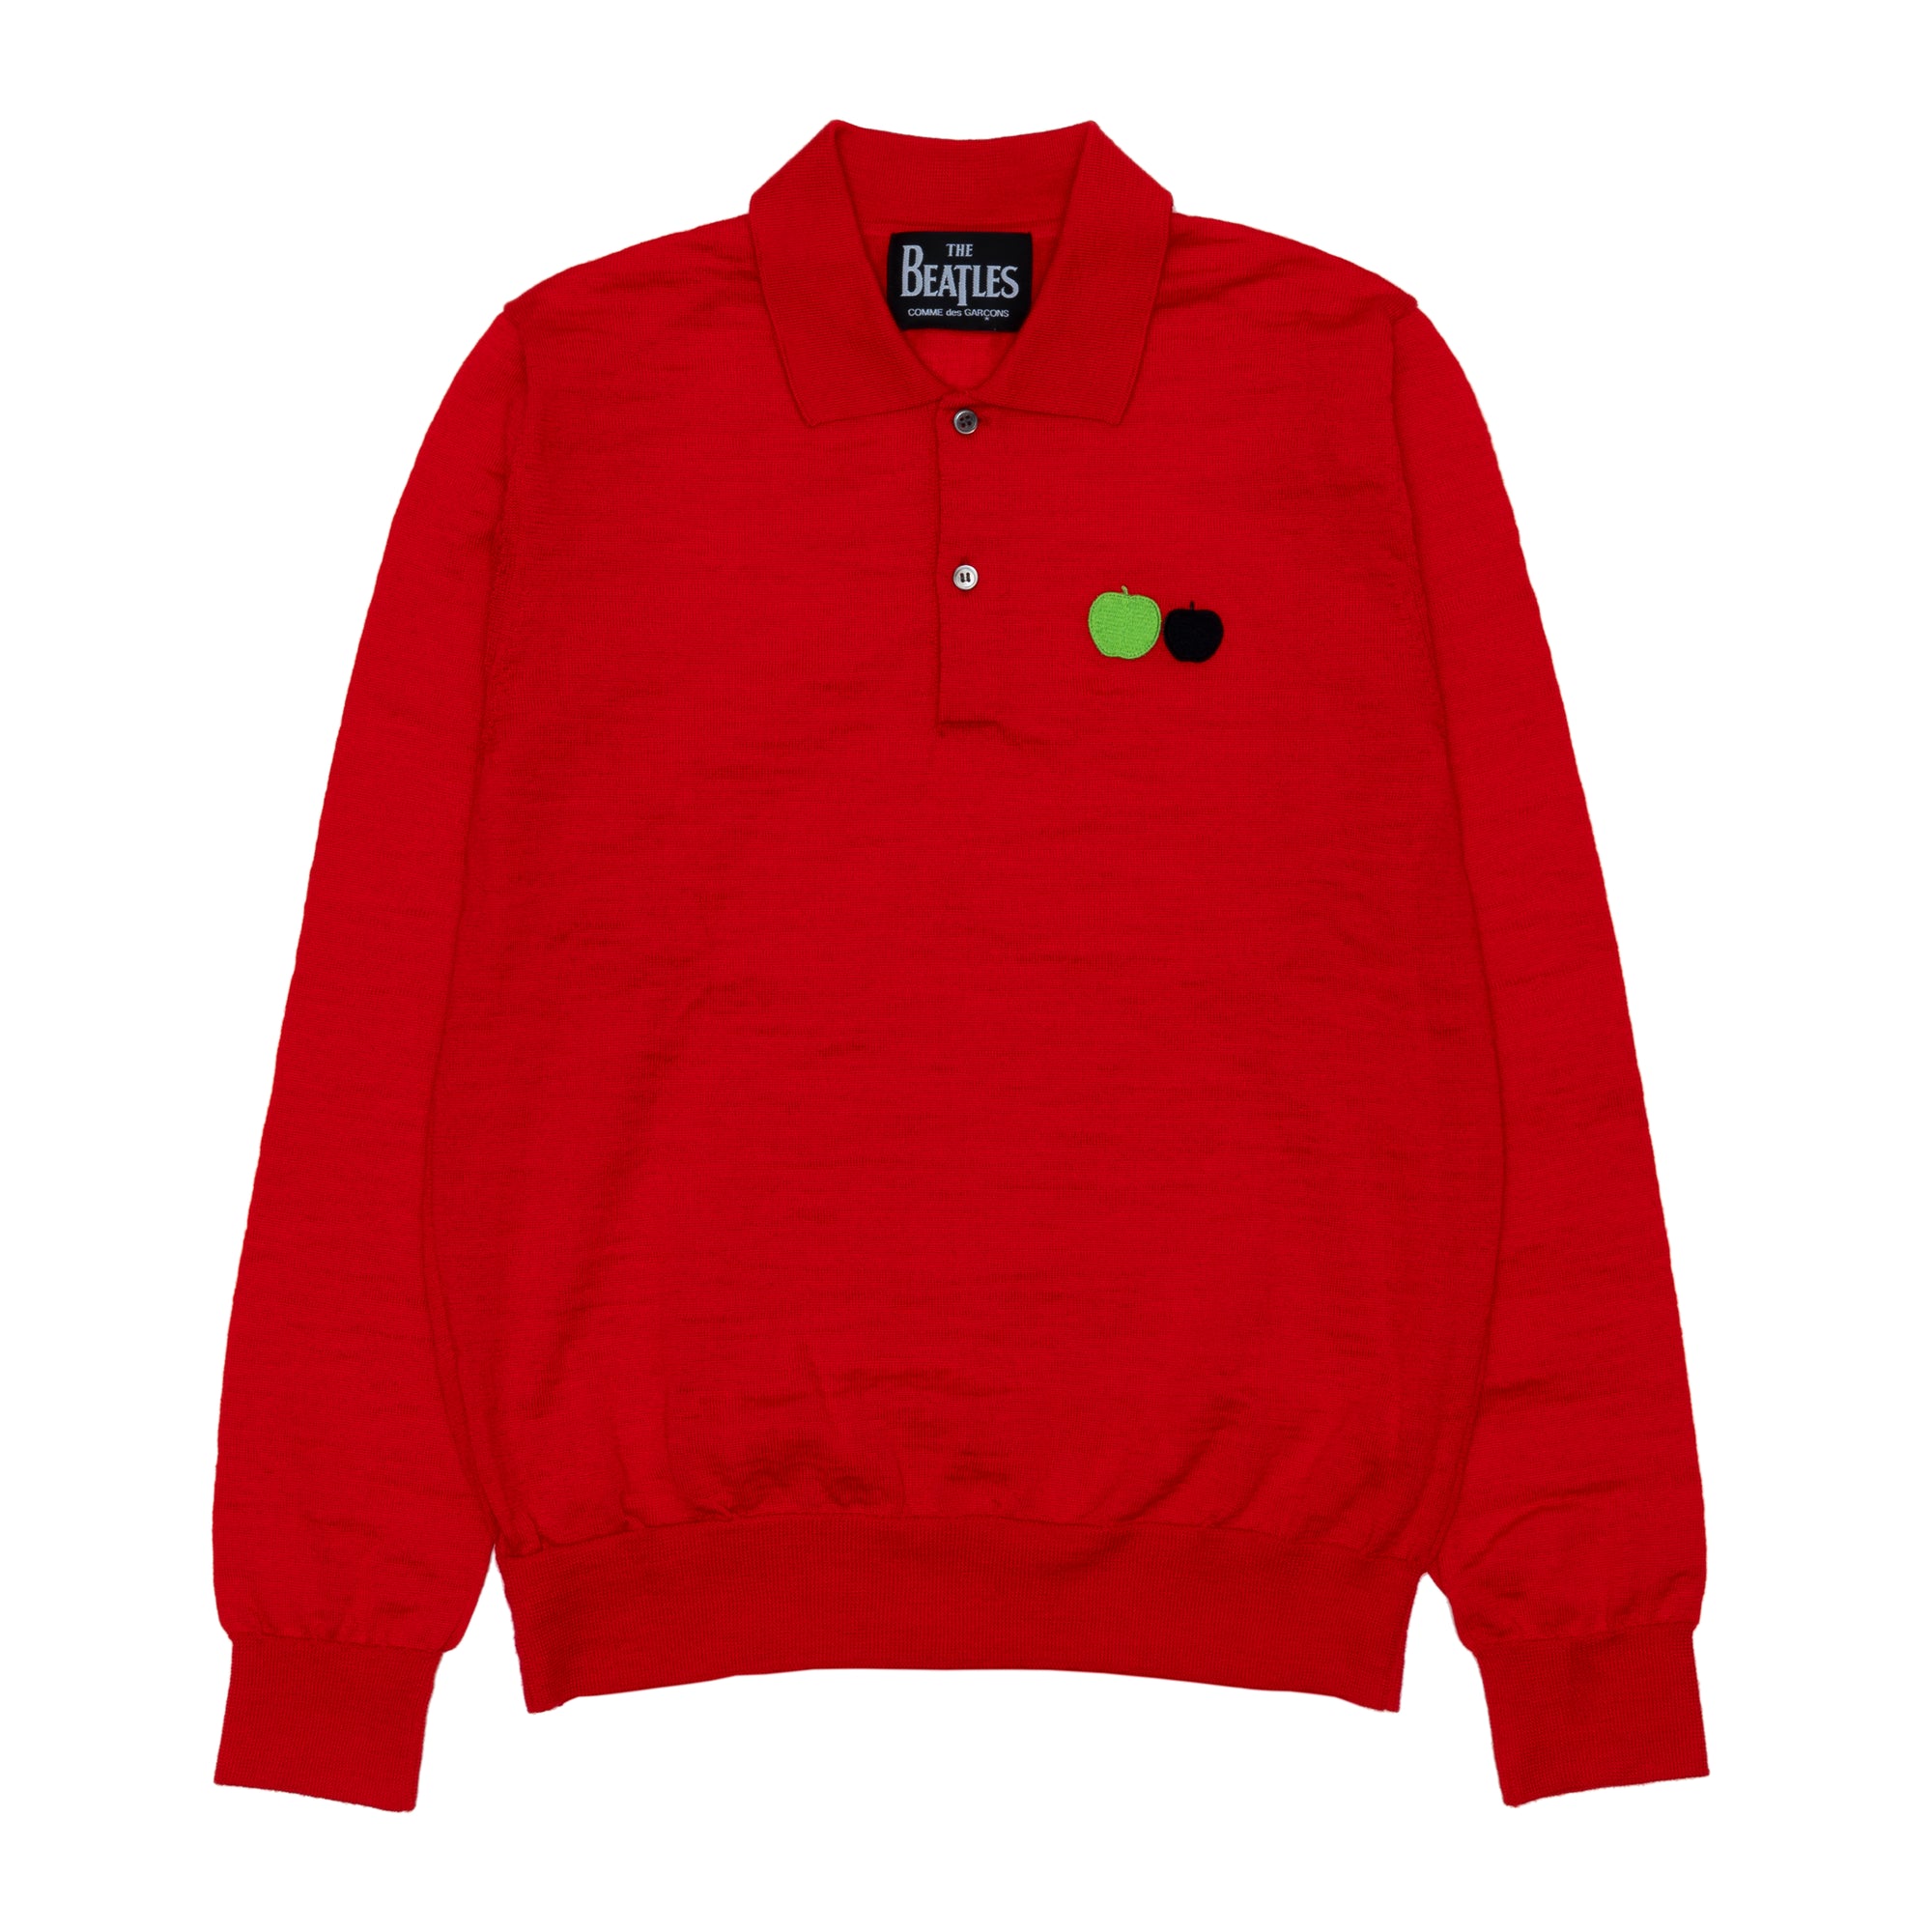 THE BEATLES CDG - One Point Knit Polo - (Red) view 1